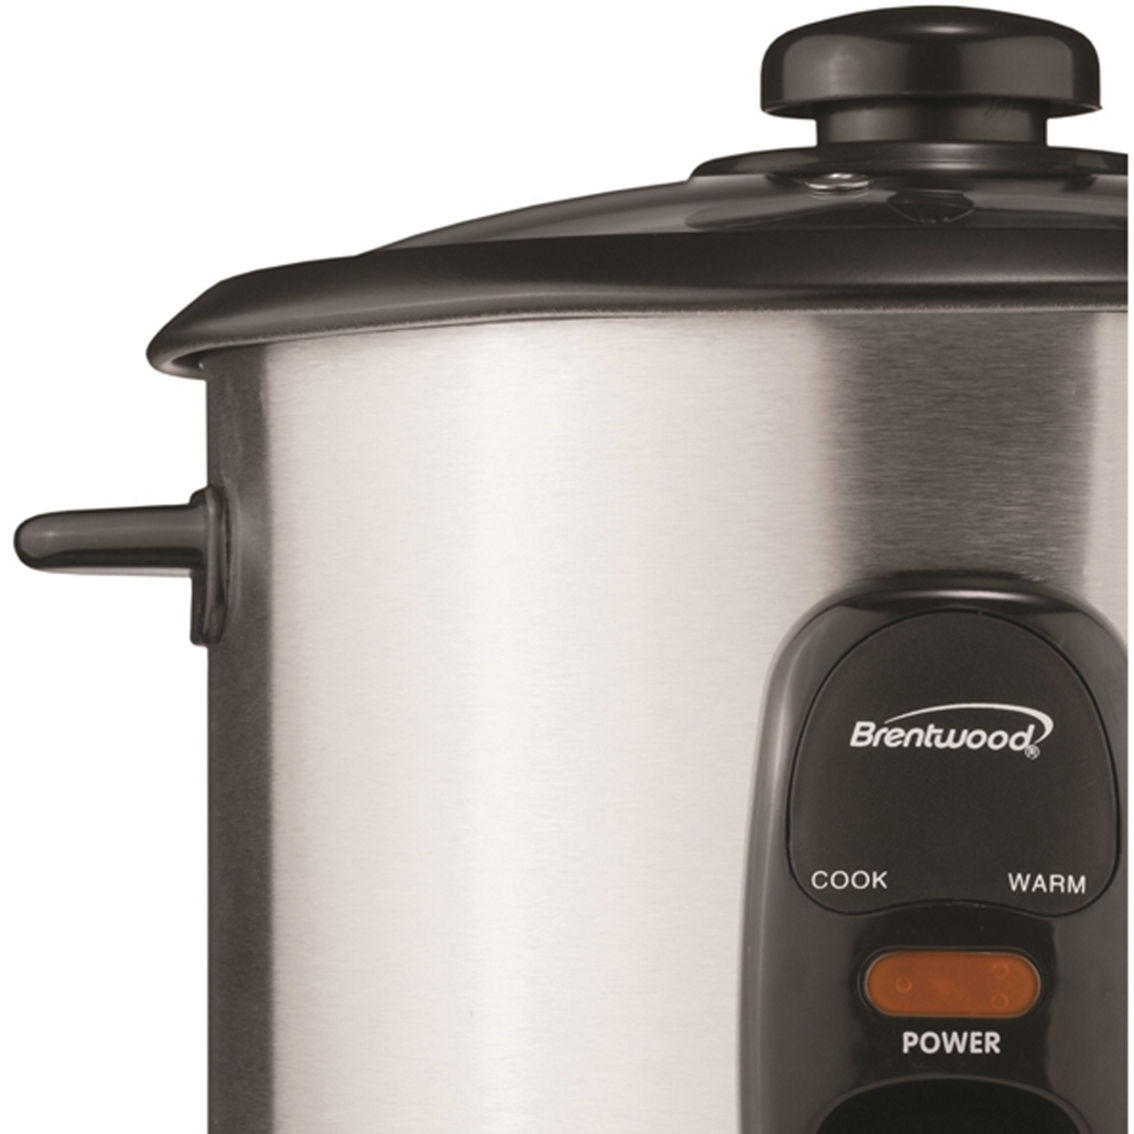 Brentwood Stainless Steel 5 Cup Rice Cooker - Image 6 of 7